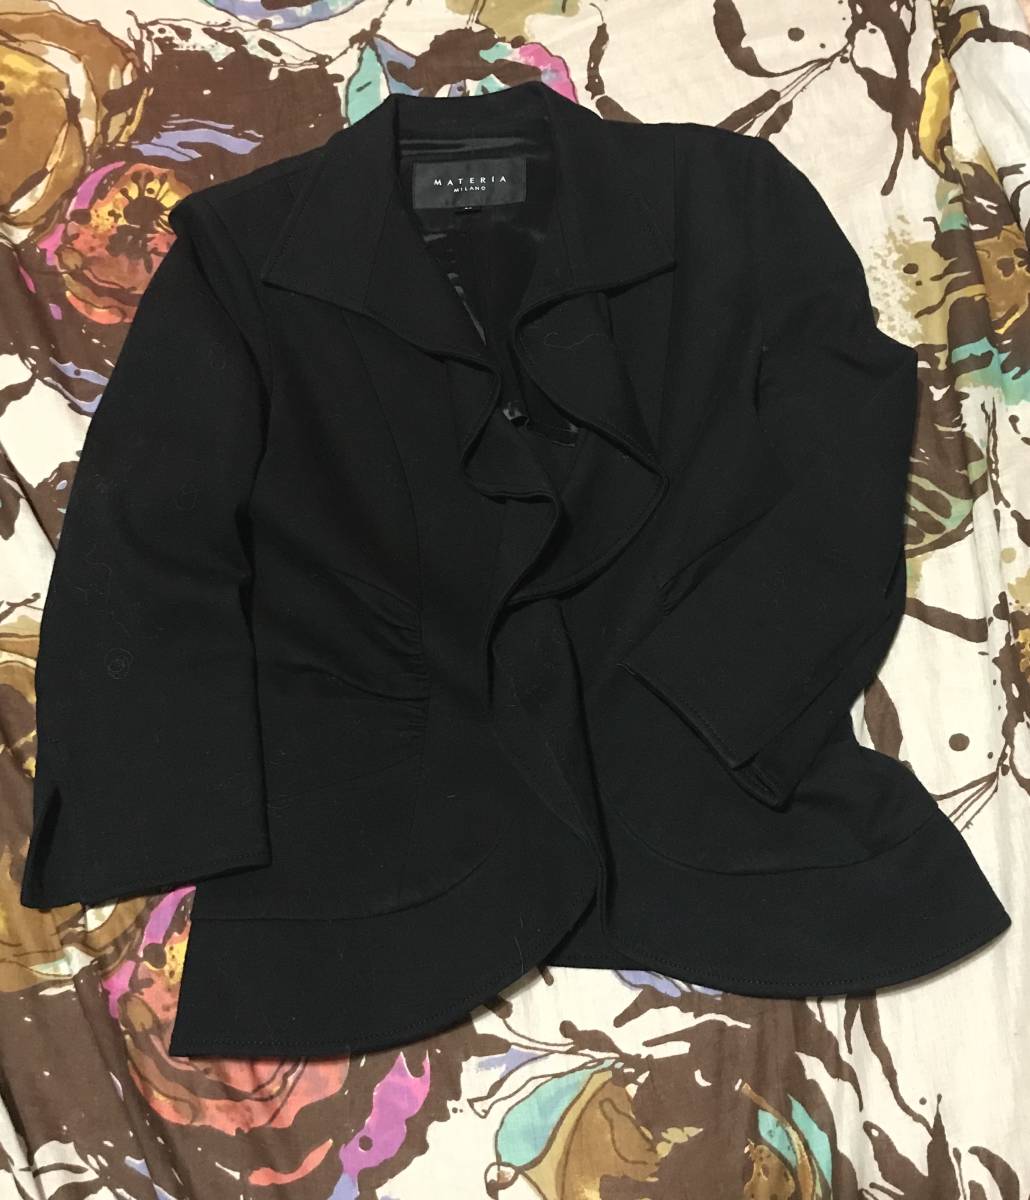  size 34*36*MATERIA MILANO Materia milano * beautiful shape suit set * black ceremonial occasions office go in . type graduation ceremony ceremony clear weather. day 